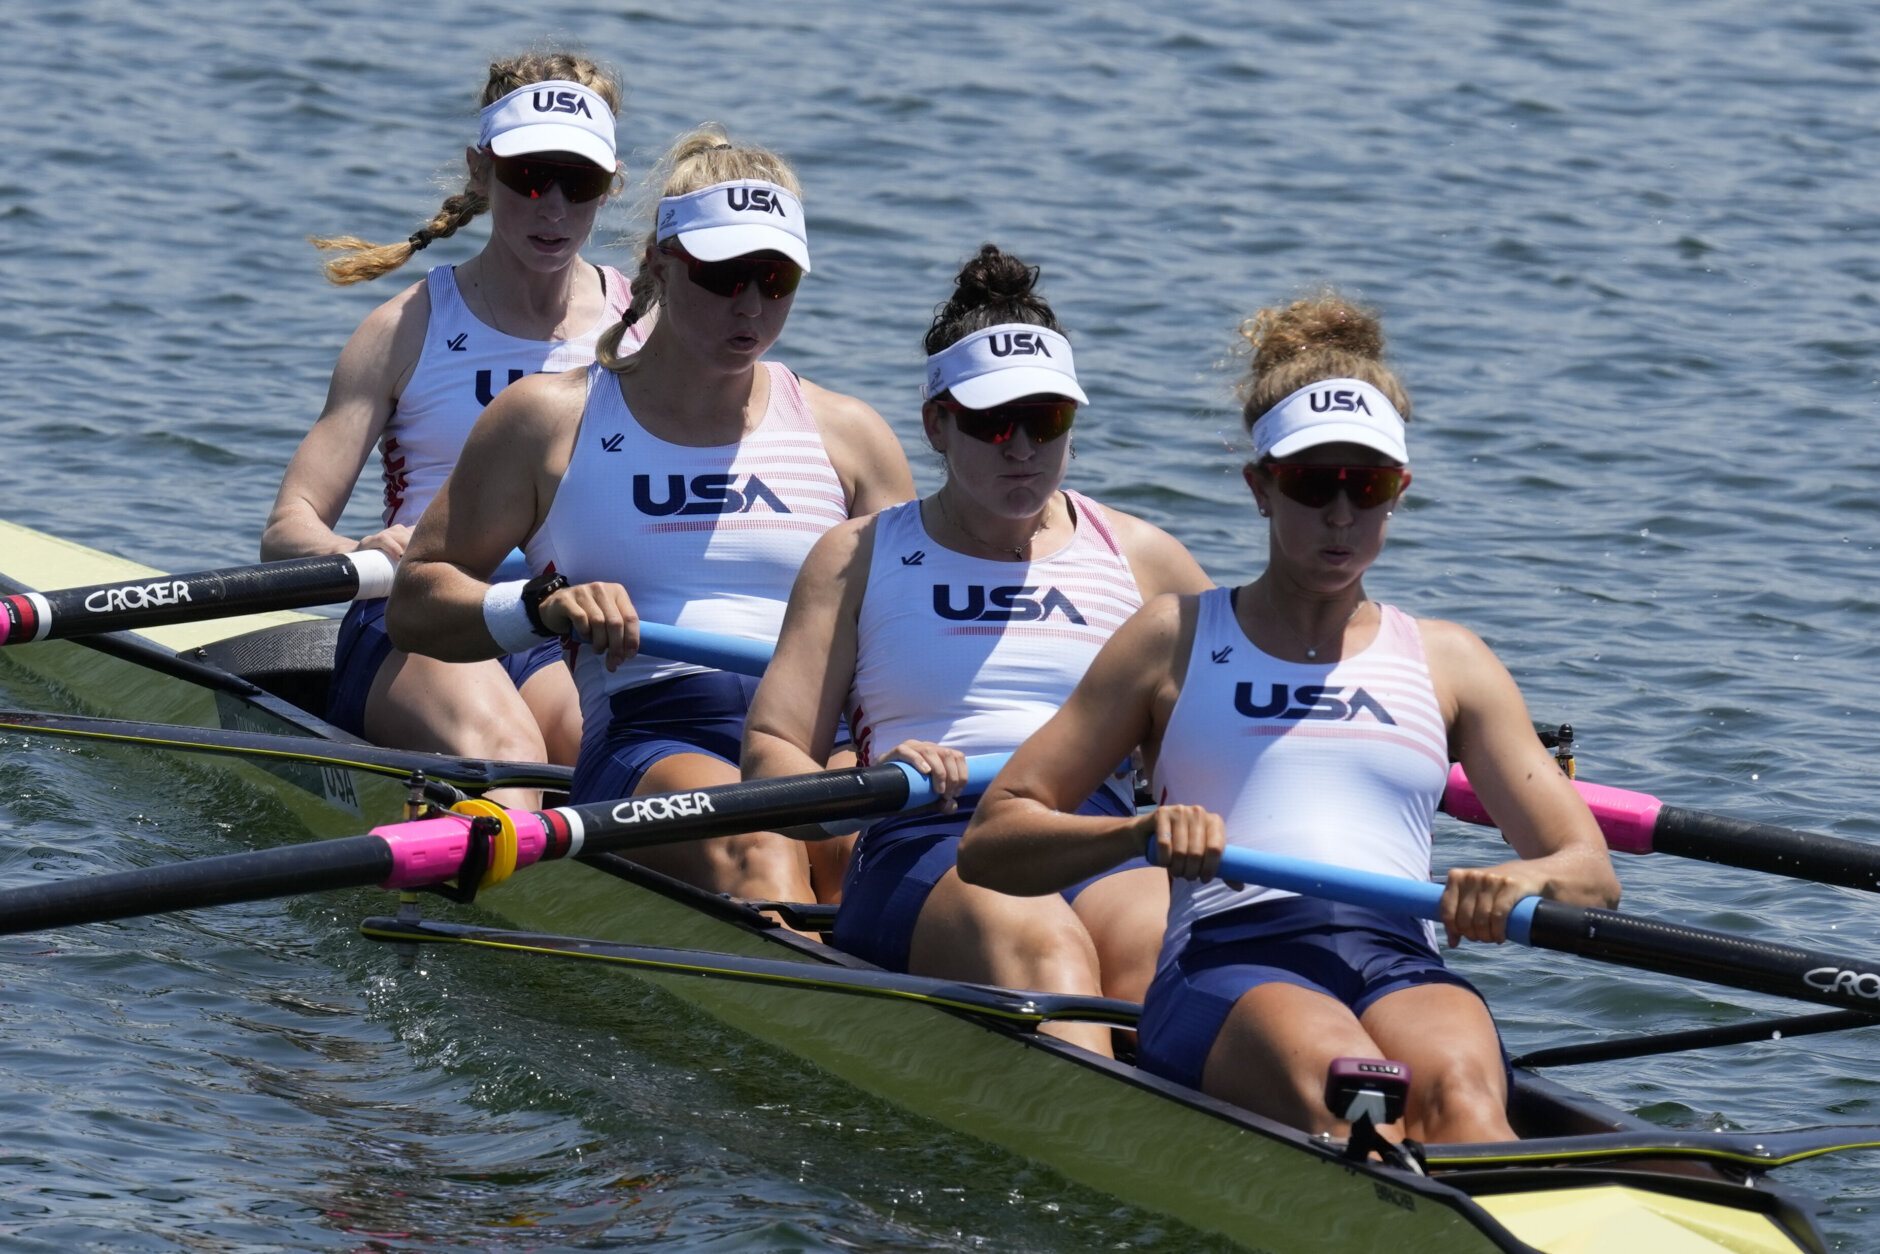 Madeleine Wanamaker, Claire Collins, Kendall Chase, Grace Luczak, of the United States, compete in the women's four at the 2020 Summer Olympics, Saturday, July 24, 2021, in Tokyo, Japan. (AP Photo/Darron Cummings)